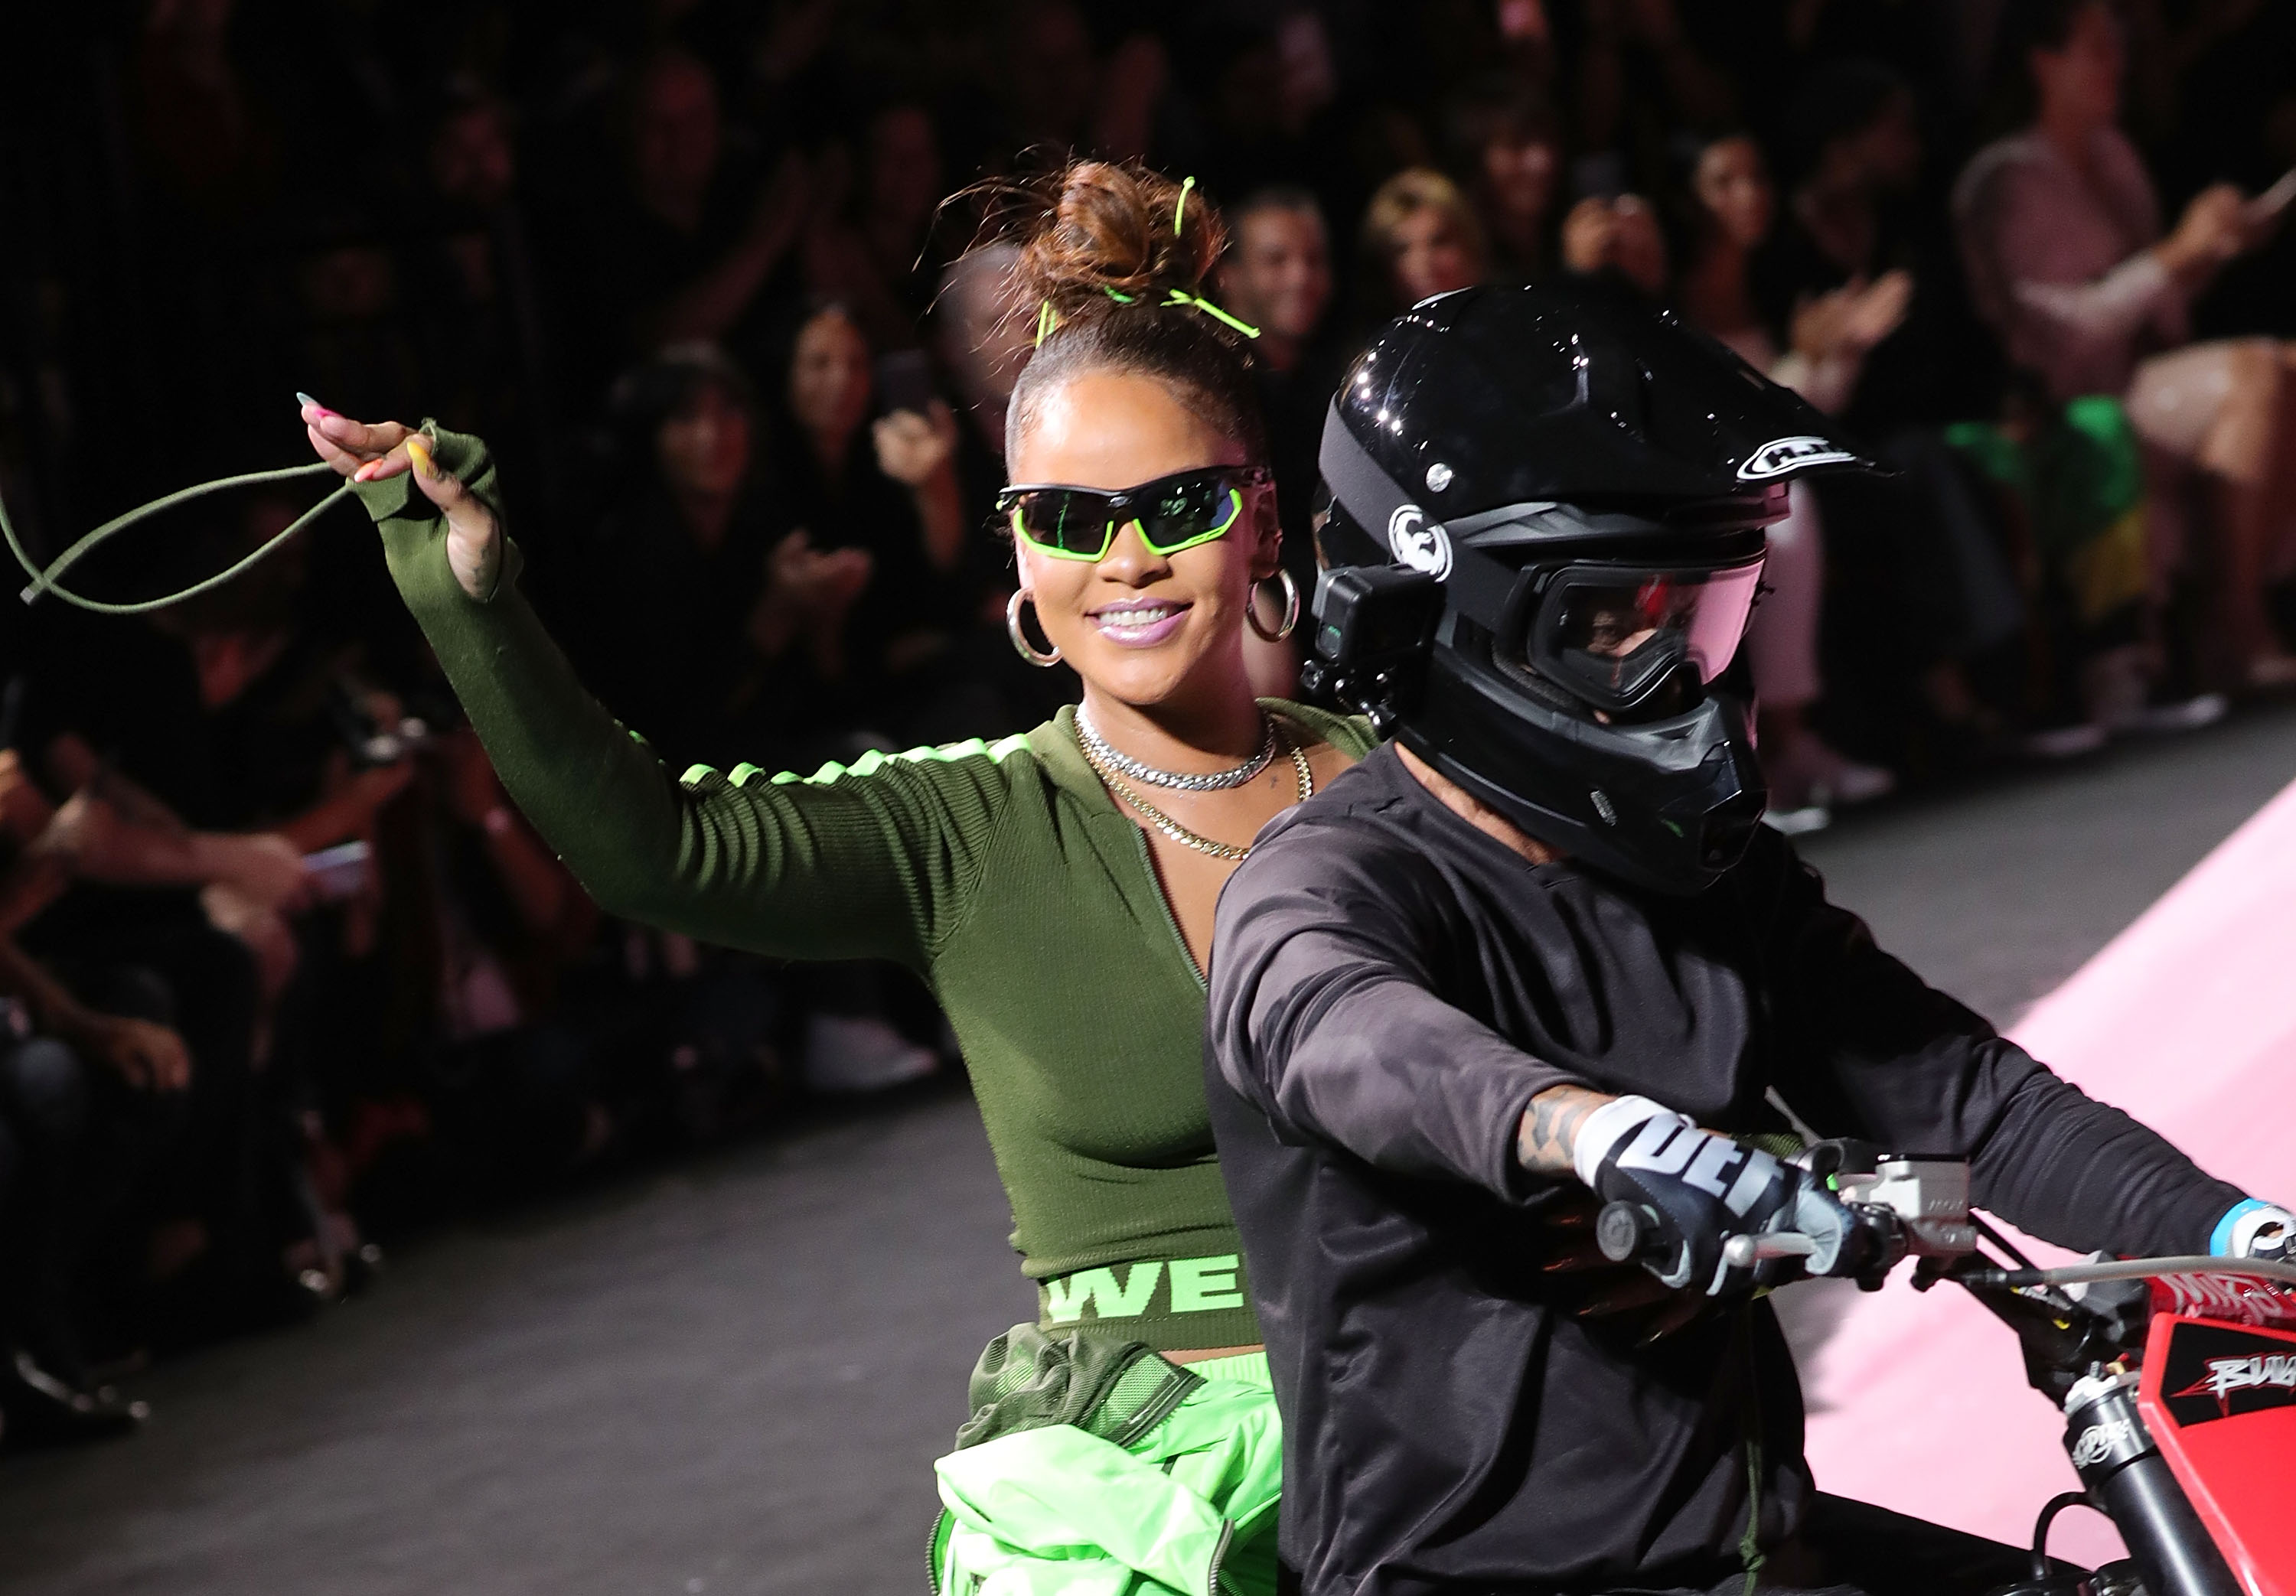 NEW YORK, NY - SEPTEMBER 10:  Rihanna waves from the back of a motorcycle at the finale of the Fenty Puma by Rihanna show during New York Fashion Week at the 69th Regiment Armory on September 10, 2017 in New York City.  (Photo by Paul Morigi/WireImage) (Paul Morigi&mdash;WireImage)